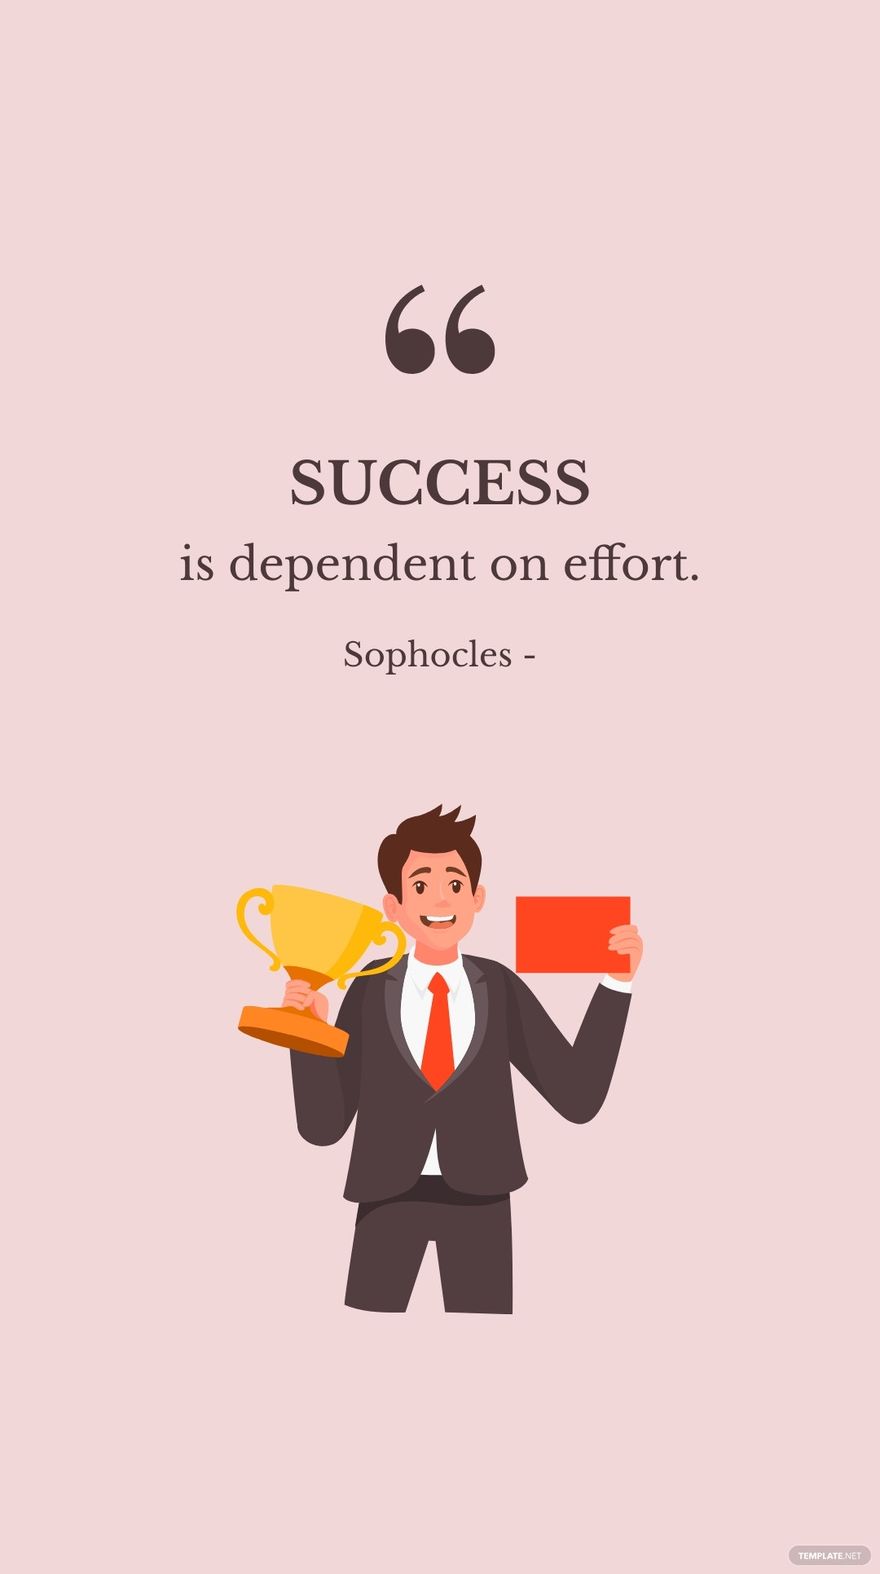 Free Sophocles - Success is dependent on effort. in JPG